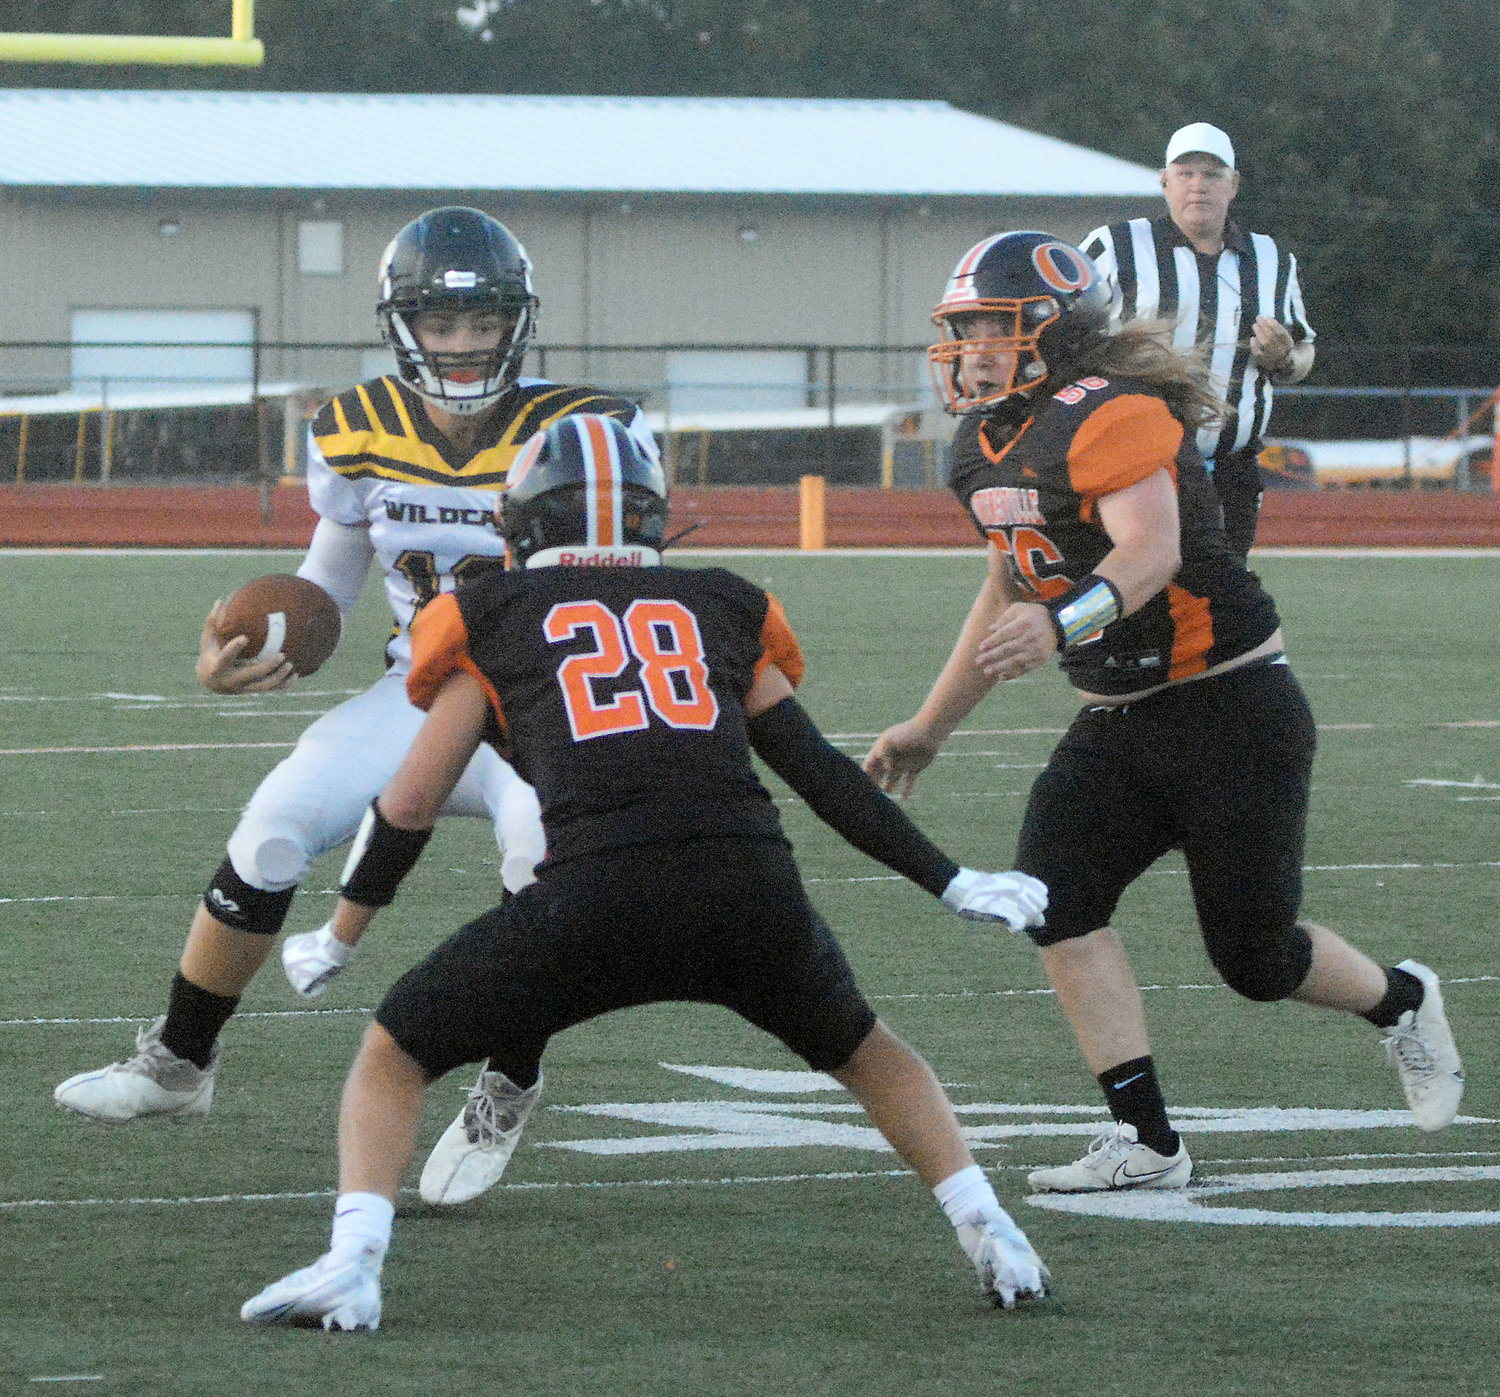 Brendon Stevens (far left) gets met by Dutchmen defenders Derrick Marquez (28) and Jacoby Limberg during Owensville’s 50-0 season-opening shutout of Cuba’s Wildcats Friday night at Dutchmen Field.